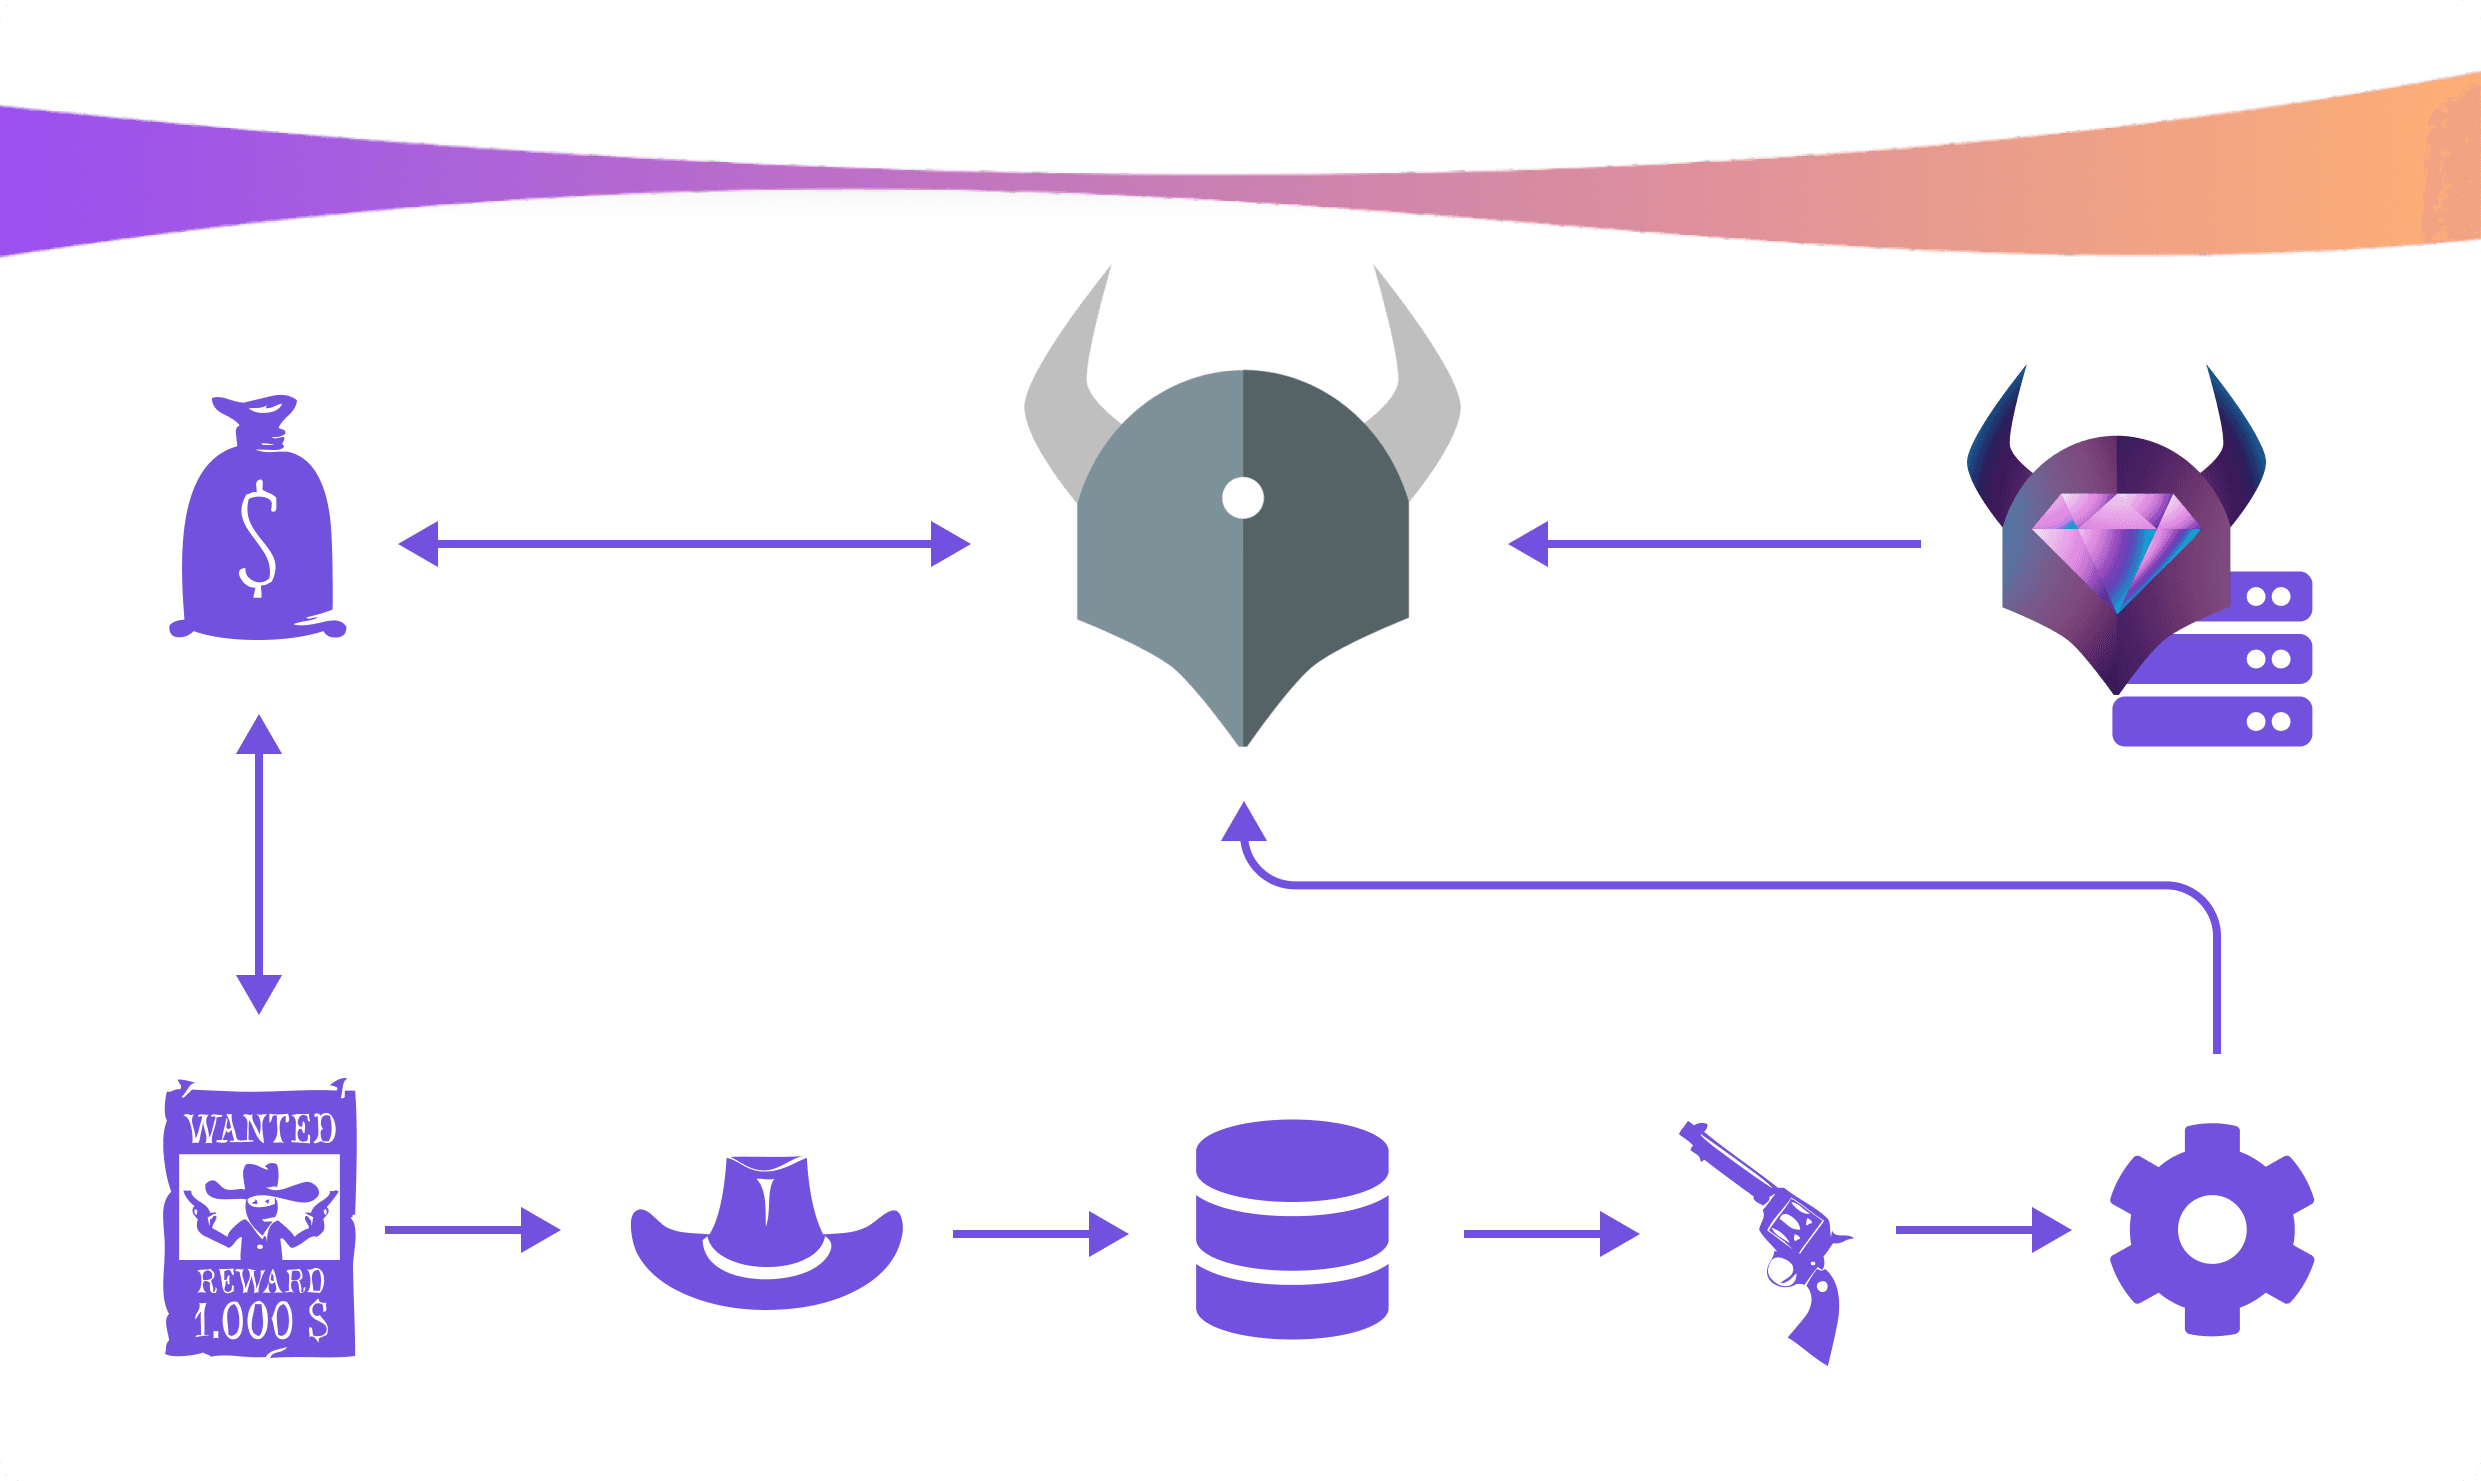 Load external data into OPA - The Good, The Bad, and The Ugly